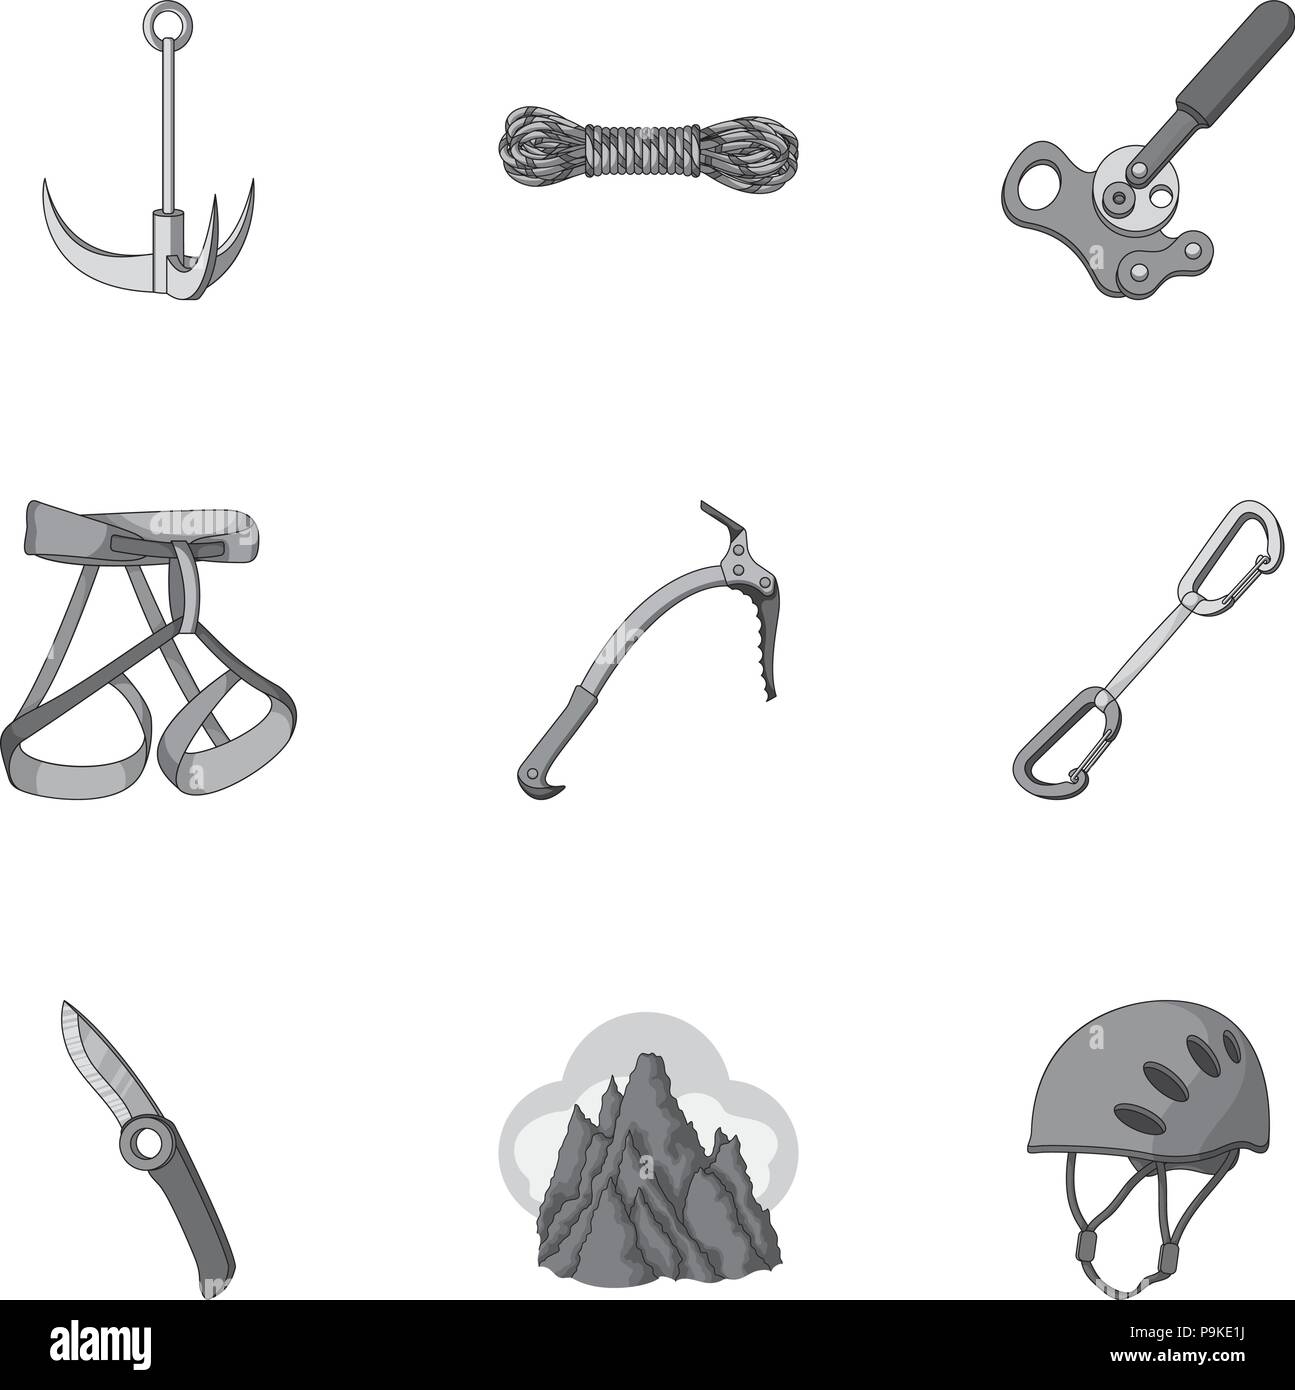 ax,boots,bunch,carbine,clamp,climber,climbing,clog,clouds,collection,conquered,conquest,crampons,different, equipment ,glacier,hammer,hank,helmet,hook,ice,icon,illustration,insurance,isolated,jumar,kinds,knife,logo,monochrome,mountain, mountaineering